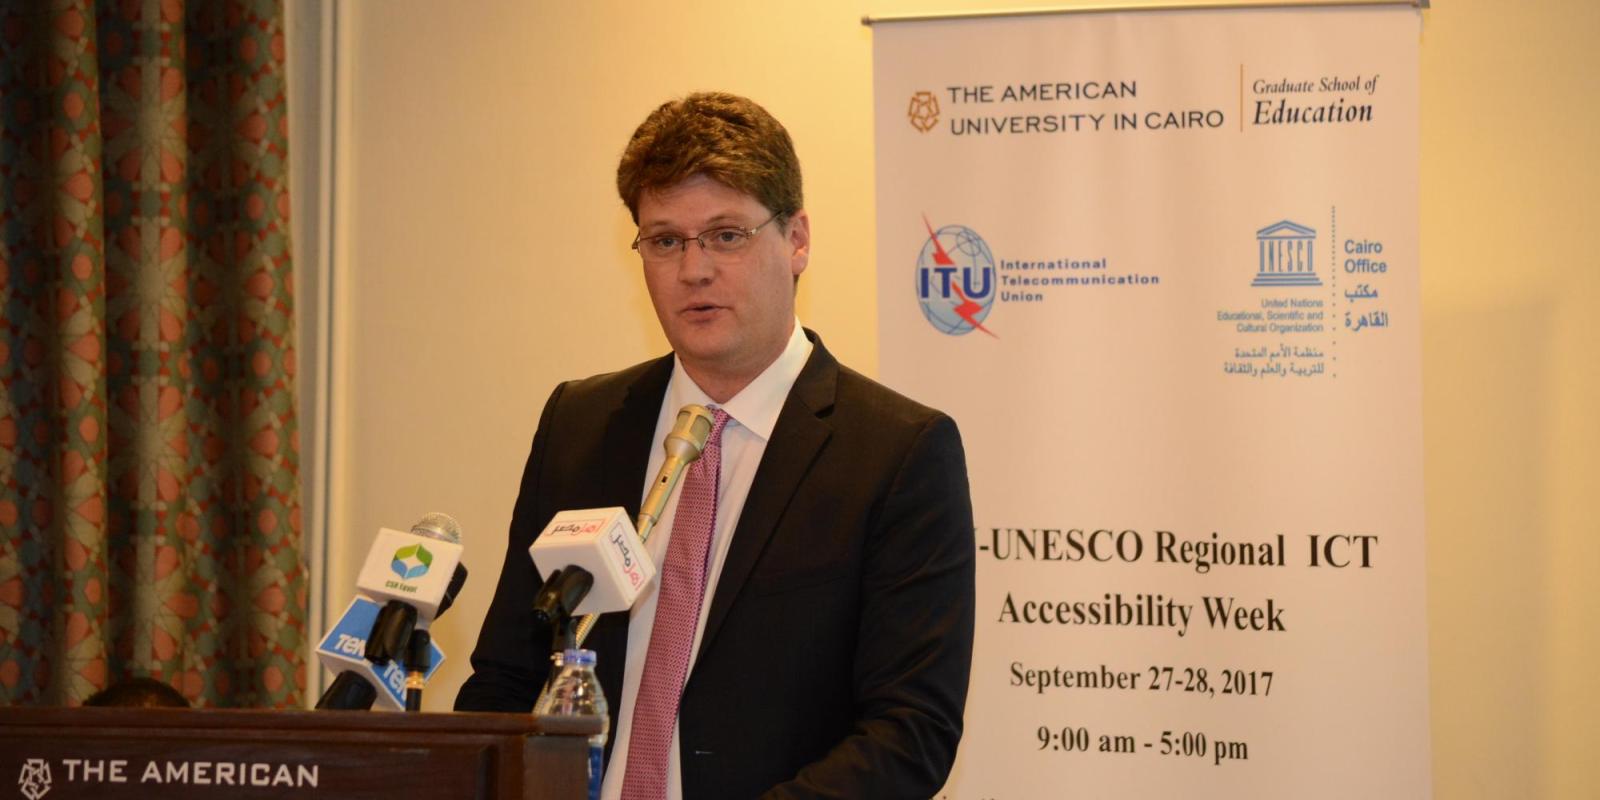 Ted Purinton, dean of AUC's Graduate School of Education, calls for recognition of the “massive hidden potential” of people with disabilities